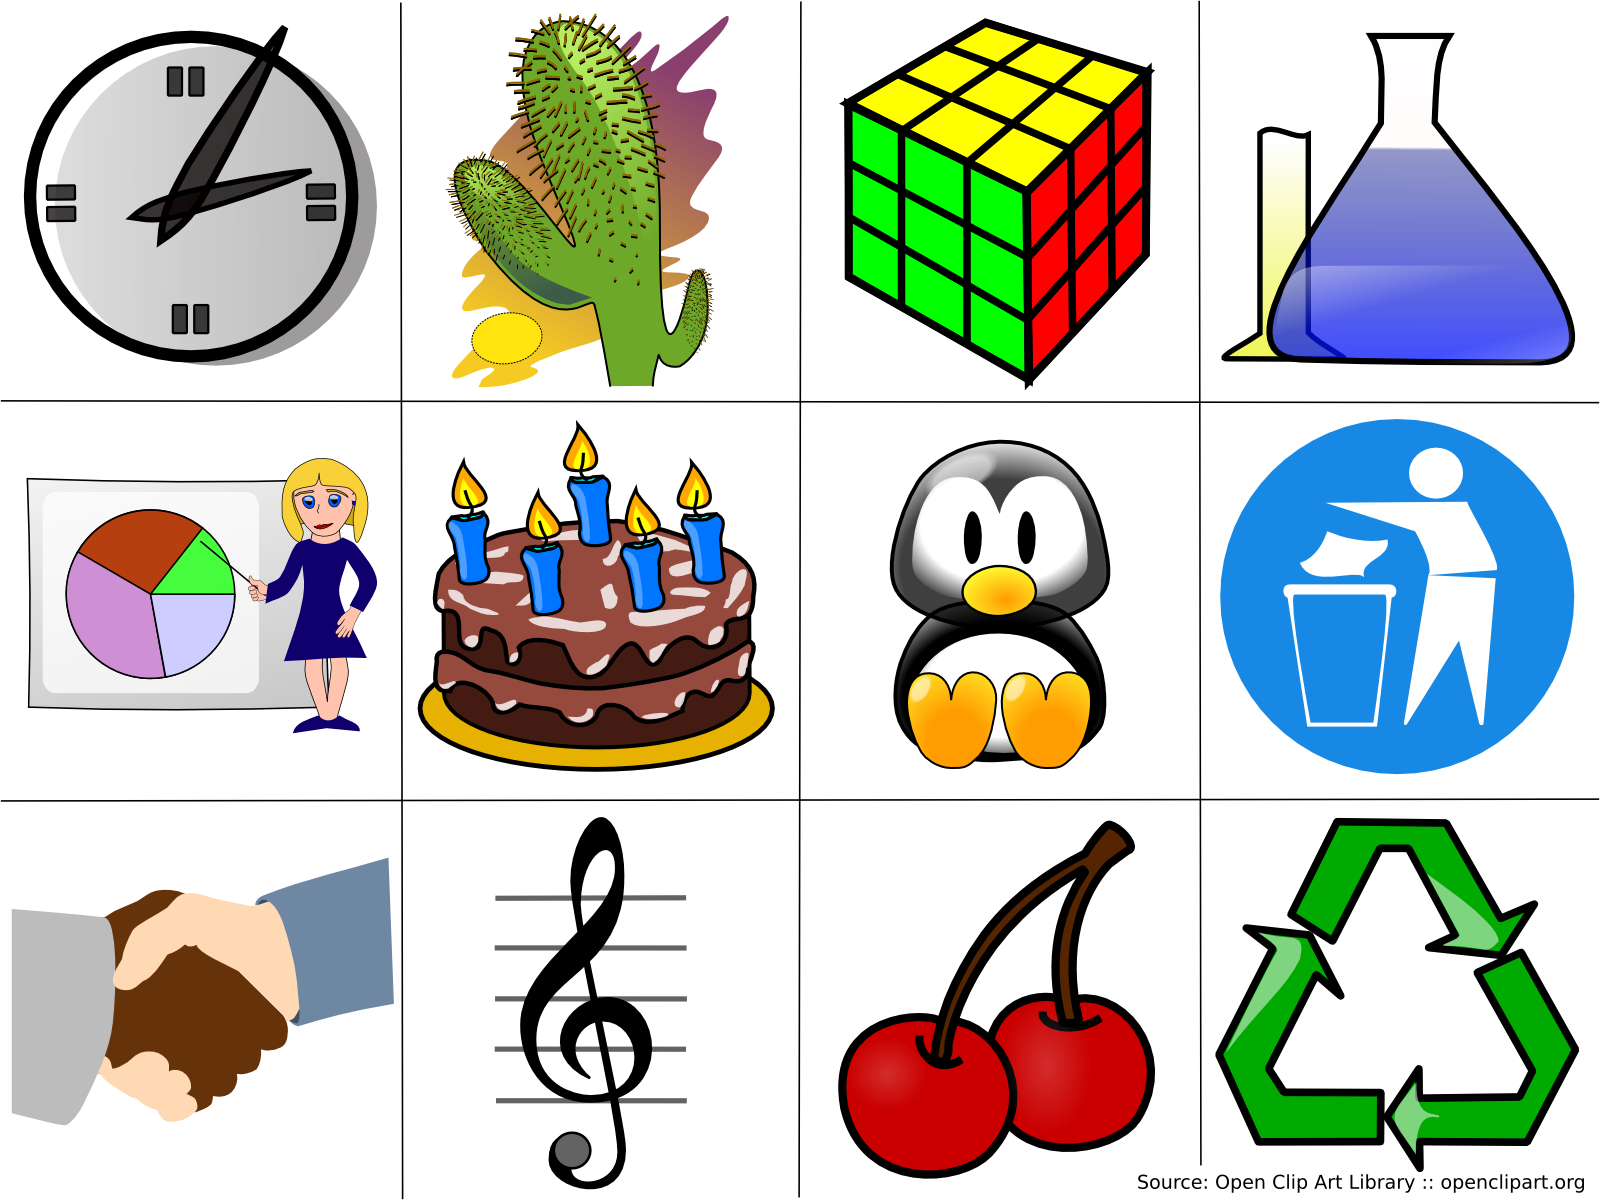 Microsoft Office Clip Art Free Images